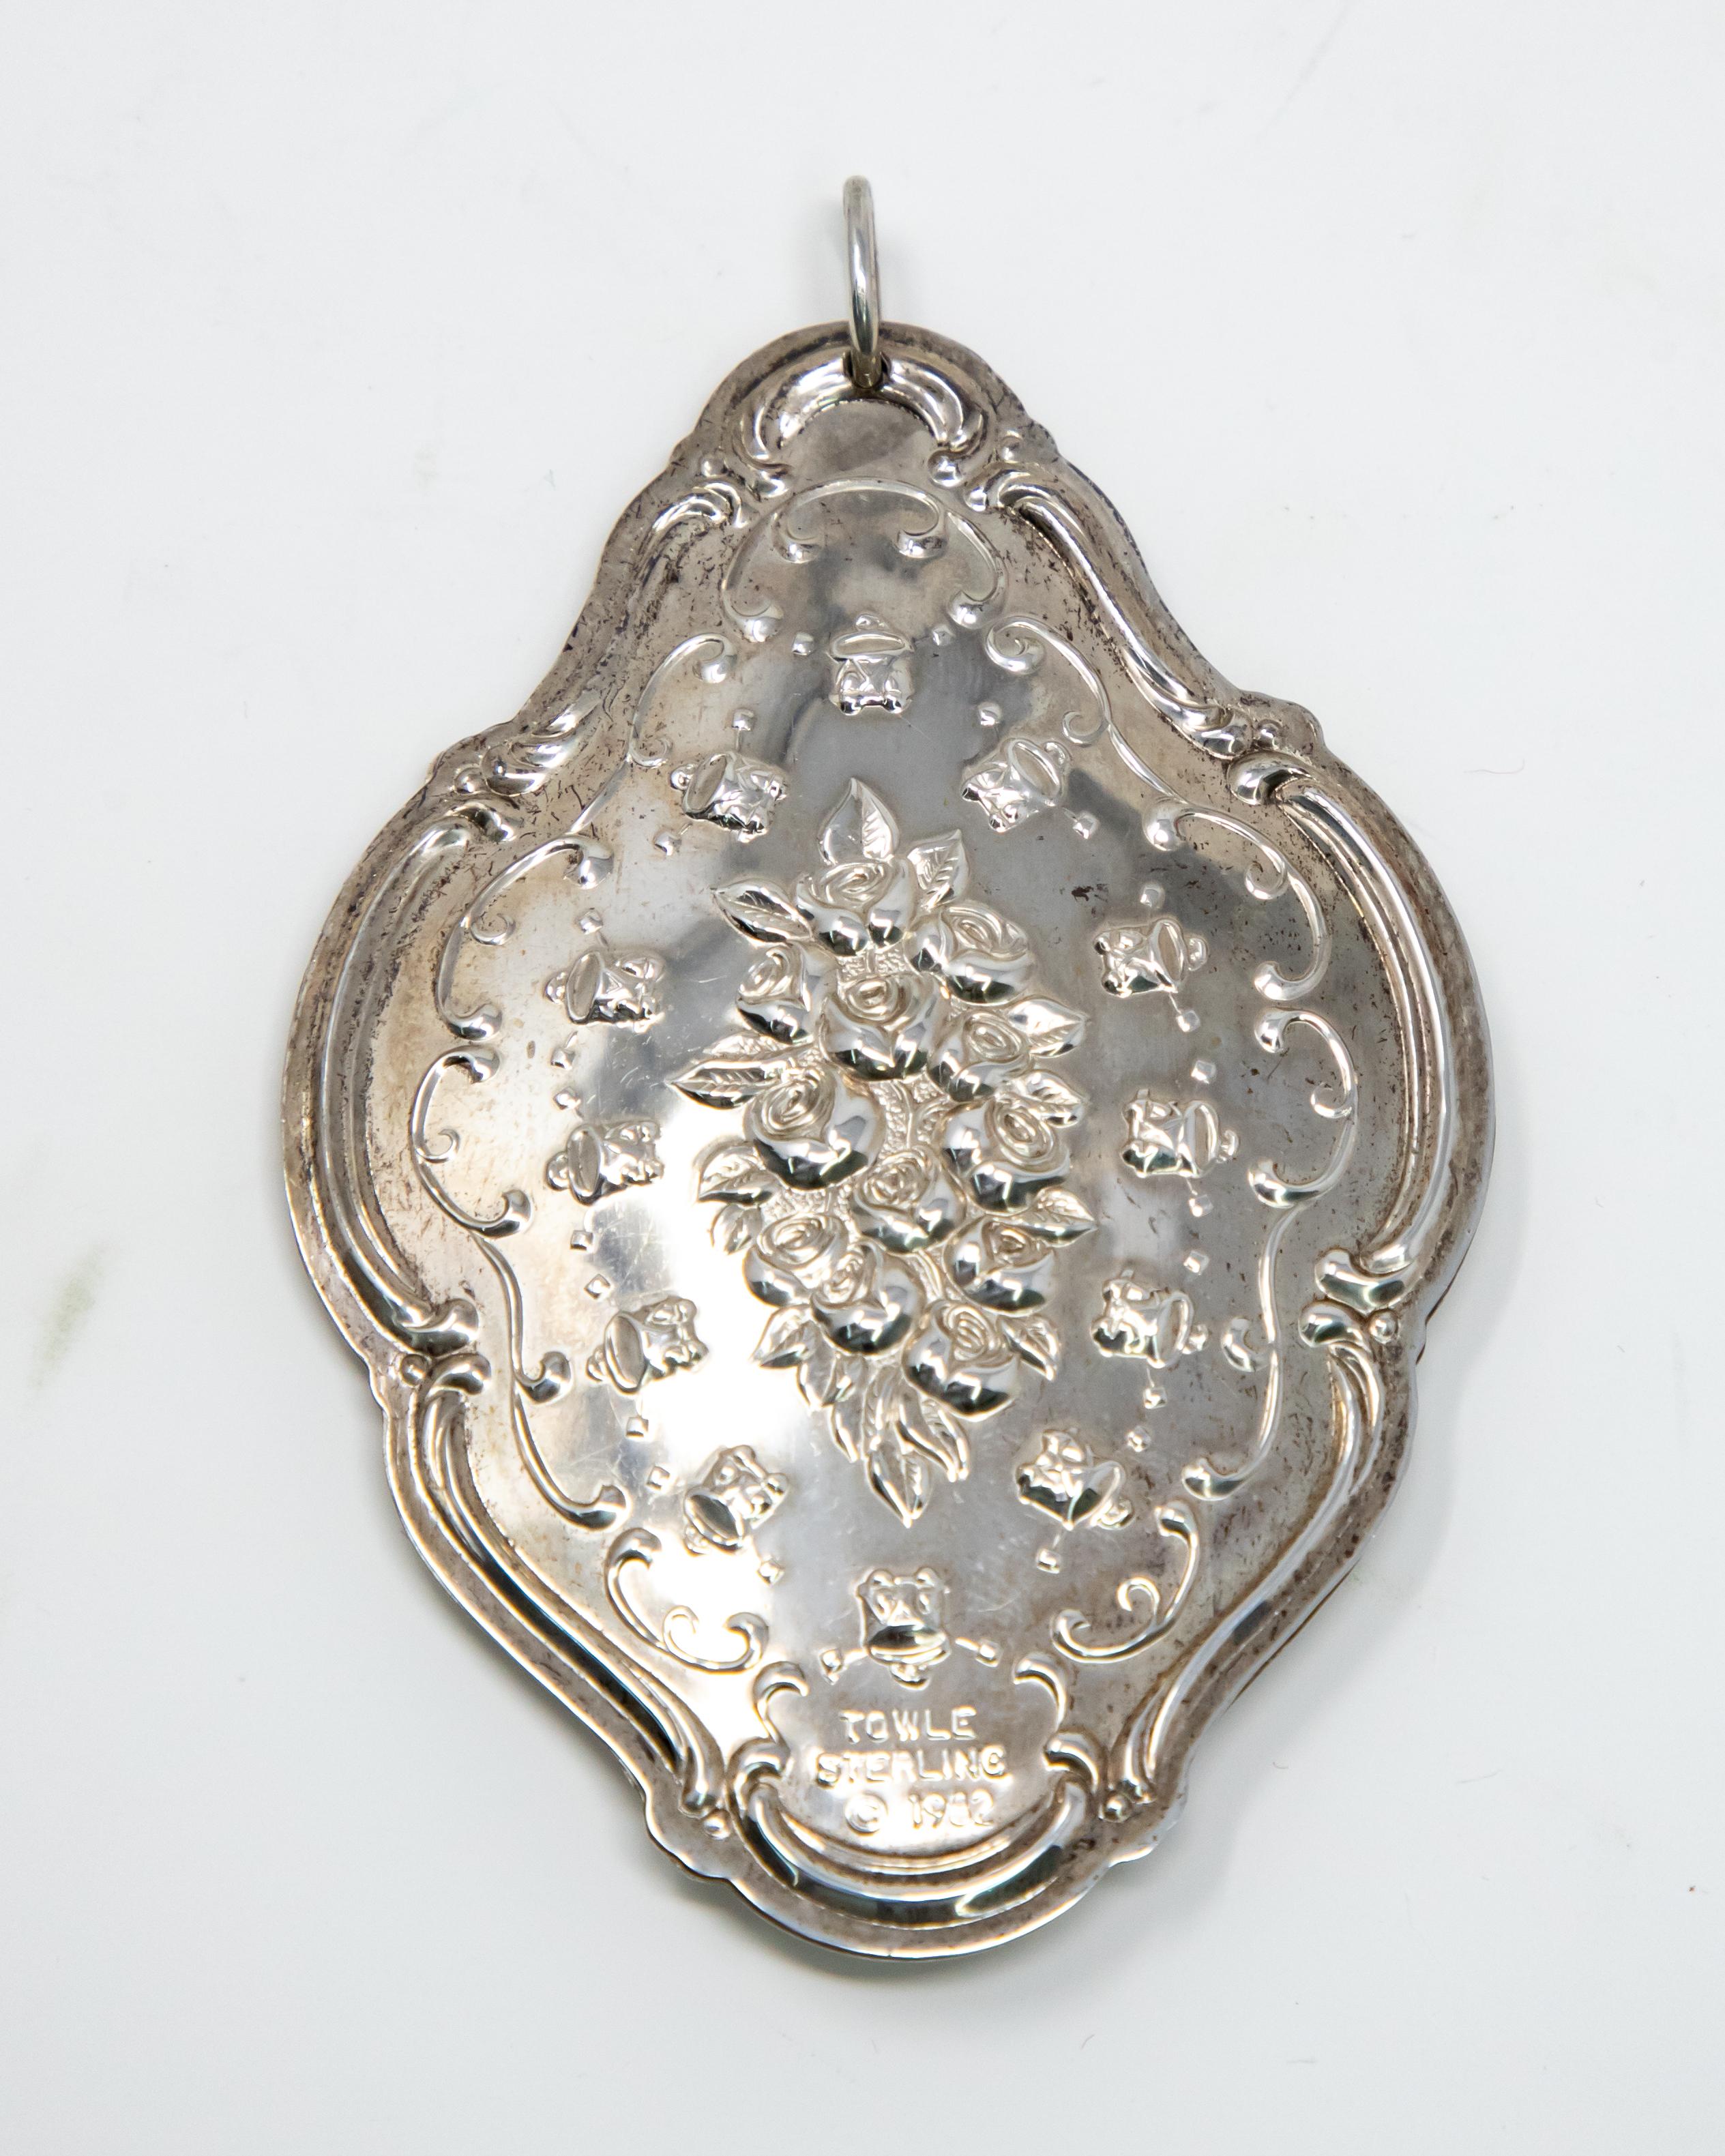 Offering this stunning Towle Sterling twelve drummer drumming ornament. The front depicts a floral and foliate motif. Around that is 12 drums, and scrollwork around them. The back depicts a floral, foliate and scrollwork motif. Marked Towle